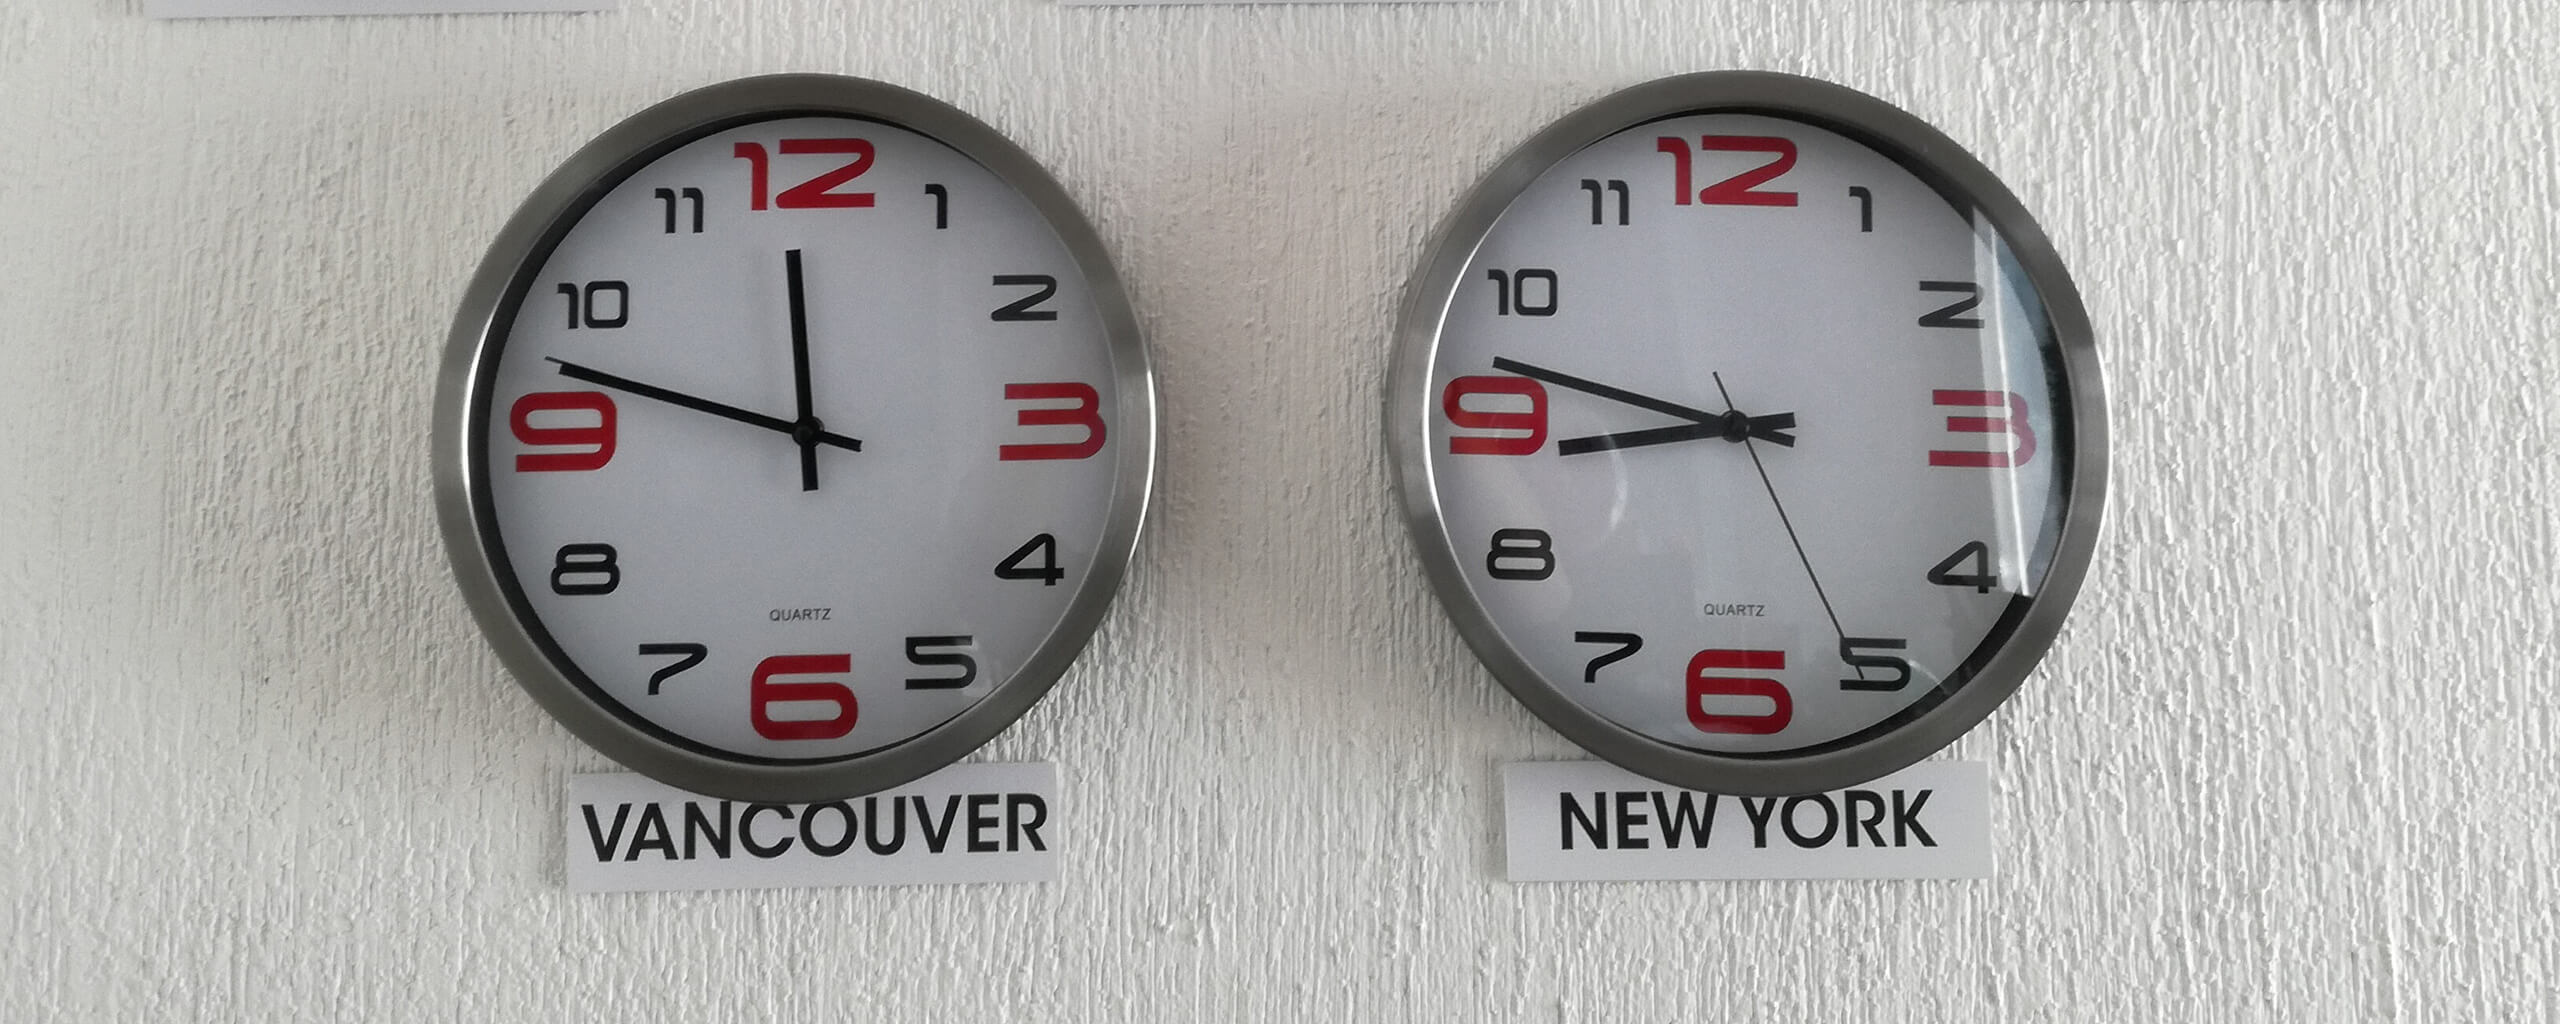 Clocks showing 2 different time zones